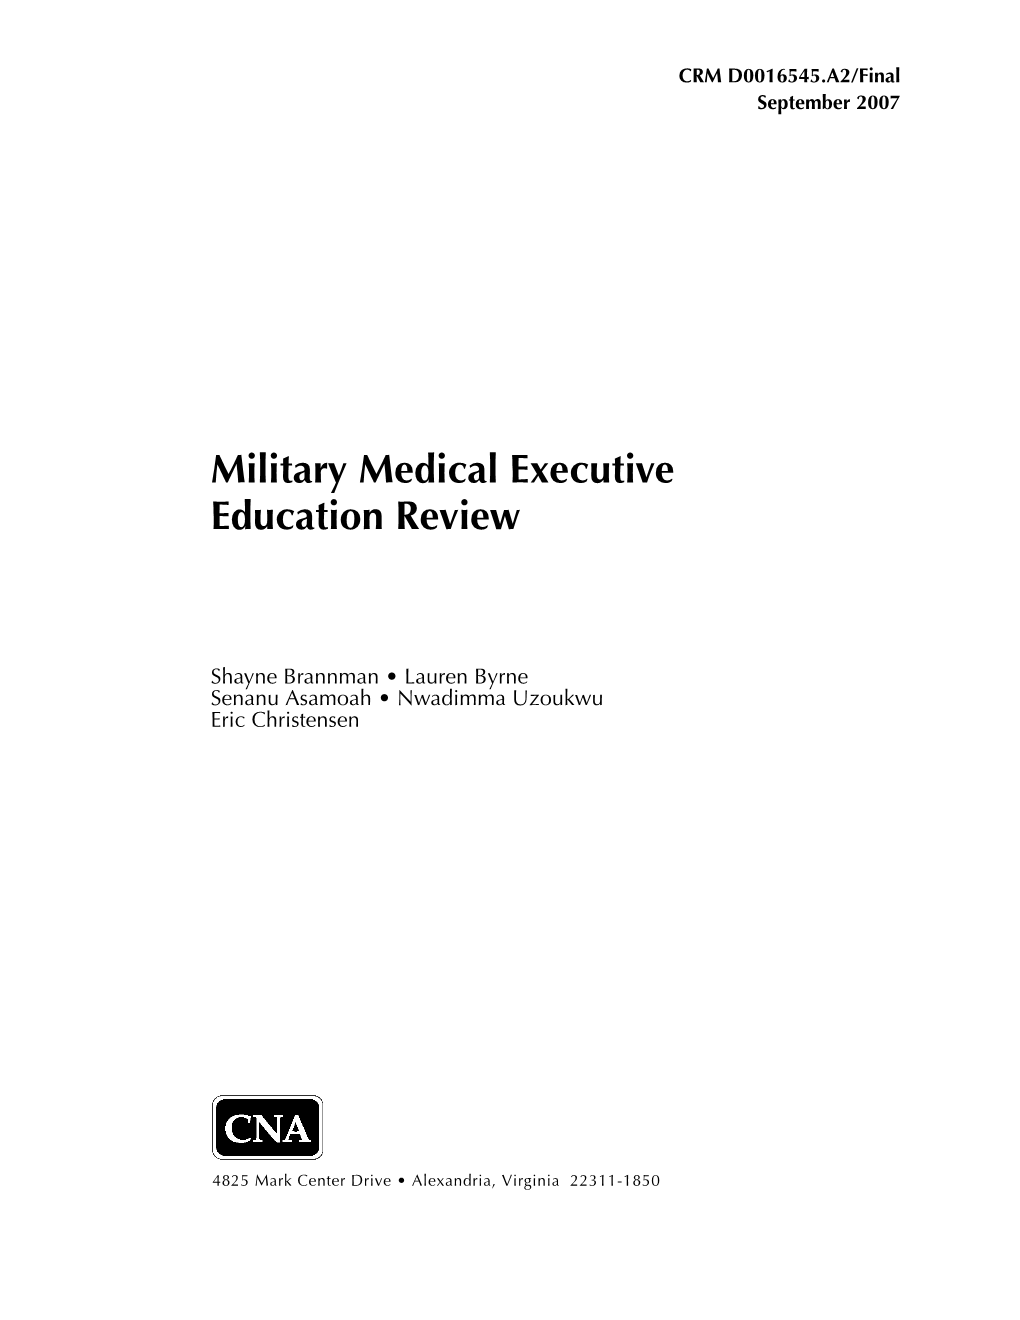 Military Medical Executive Education Review